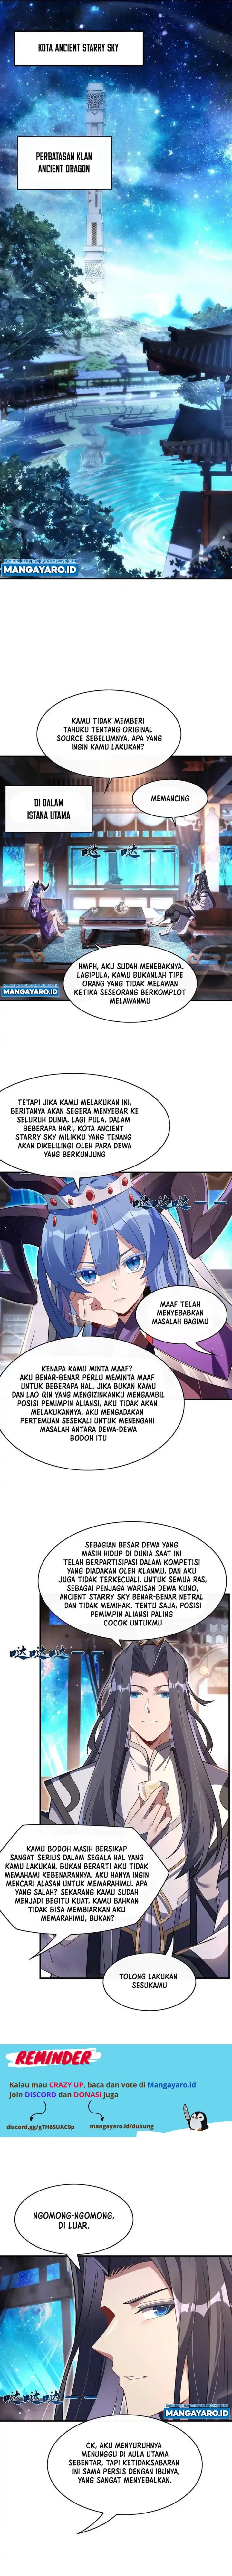 Dilarang COPAS - situs resmi www.mangacanblog.com - Komik my female apprentices are all big shots from the future 276 - chapter 276 277 Indonesia my female apprentices are all big shots from the future 276 - chapter 276 Terbaru 6|Baca Manga Komik Indonesia|Mangacan